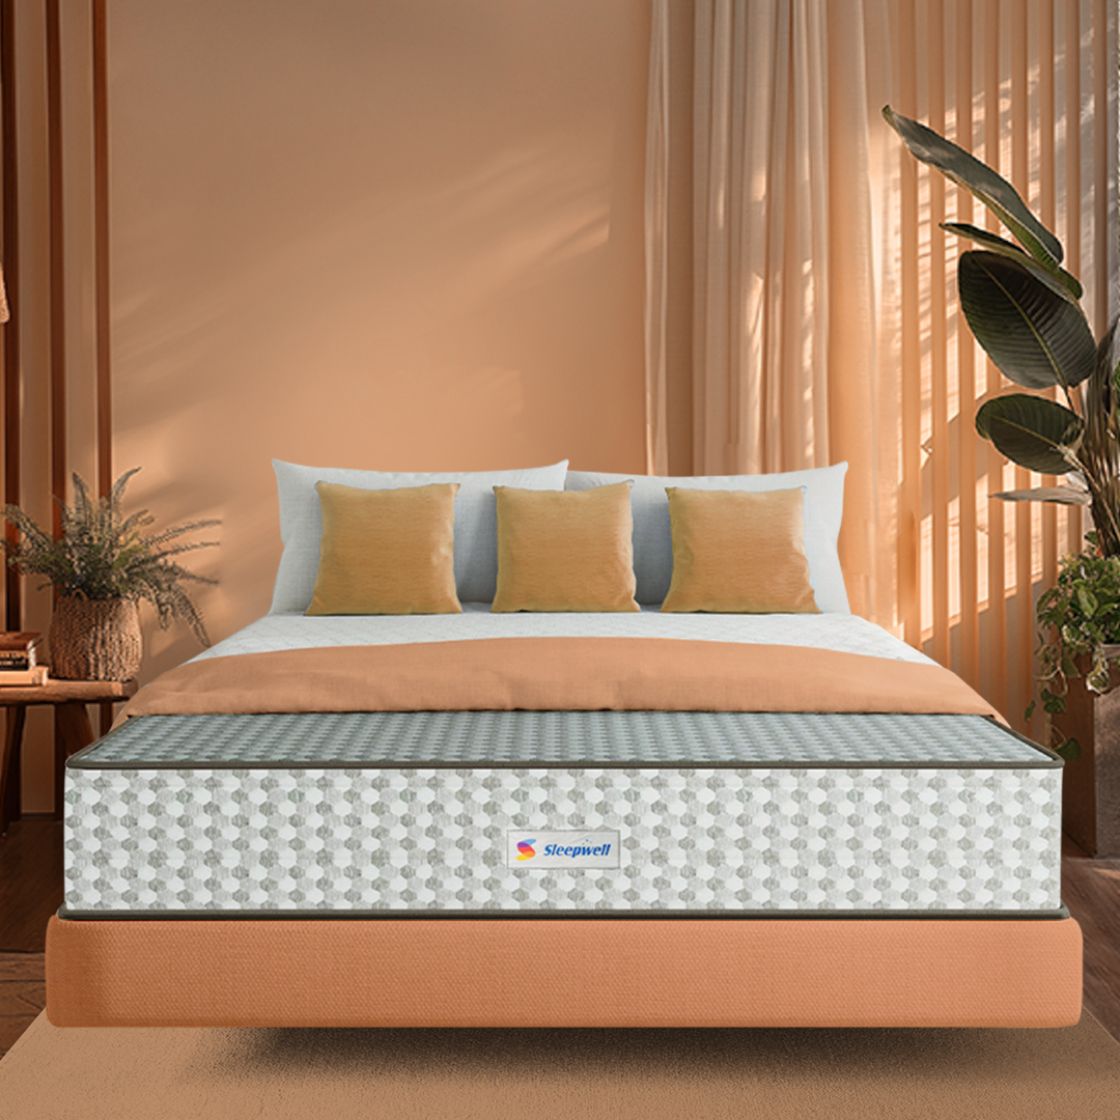 Sleepwell Dual PRO Profiled Foam Reversible 6-inch Double Bed Size, Gentle and Firm, Triple Layered Anti Sag Foam Mattress (Grey, 84x48x6)